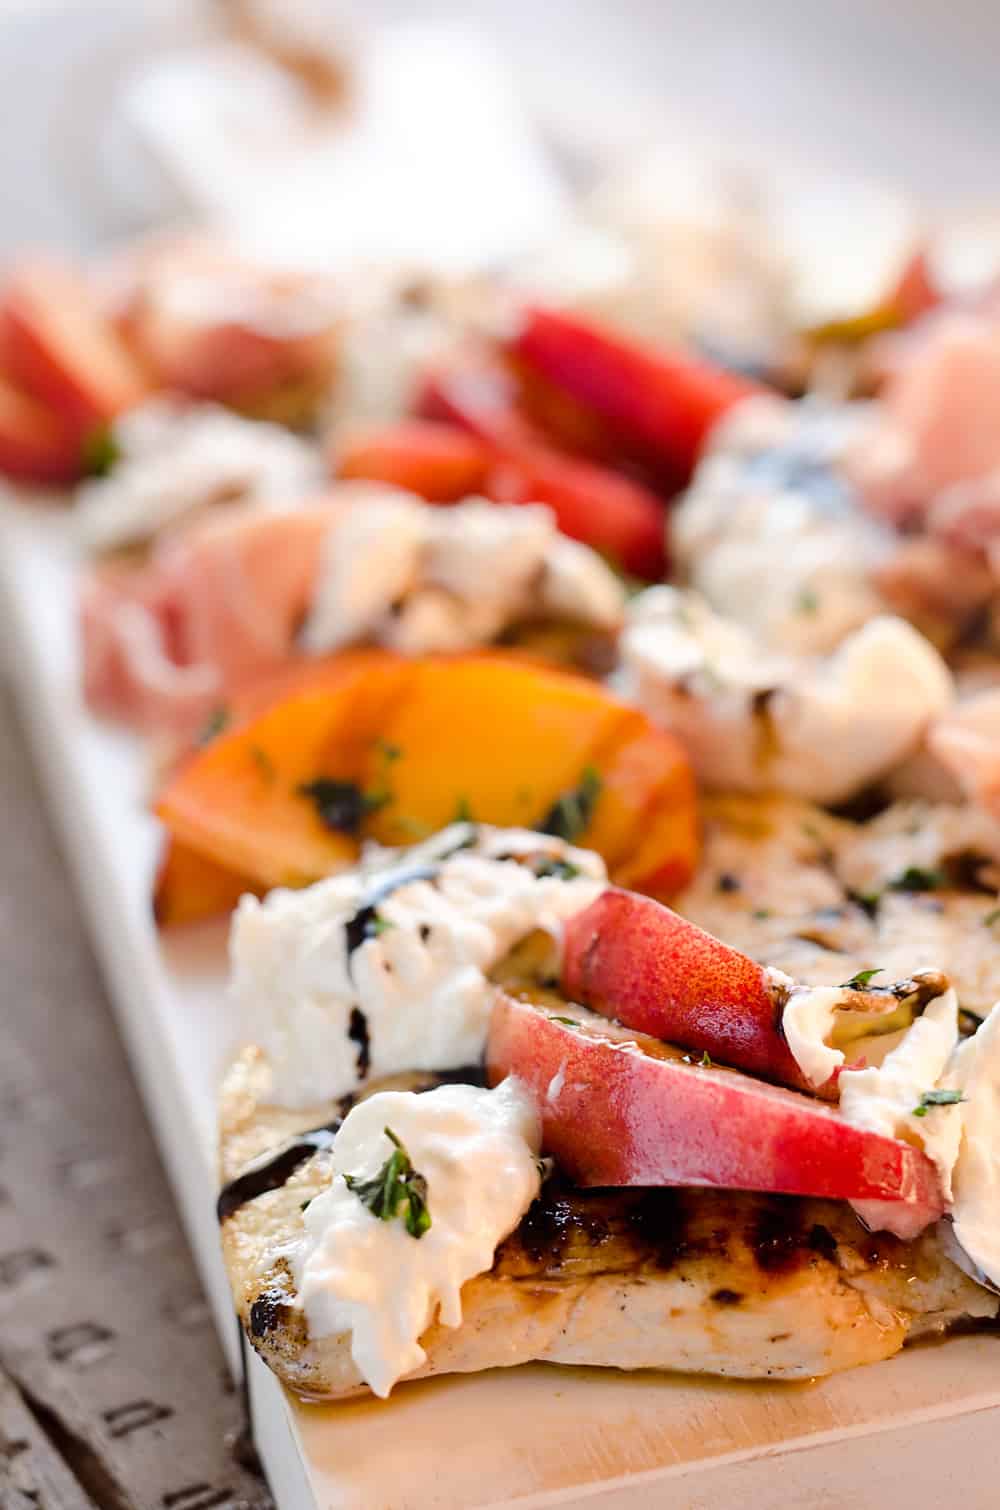 Balsamic Chicken with Peaches & Prosciutto is a deliciously simple and healthy dinner made on the grill in just 10 minutes! Grilled chicken is topped with fresh peaches and burrata cheese and finished off with a balsamic reduction and basil for a combination of flavors you will love. 